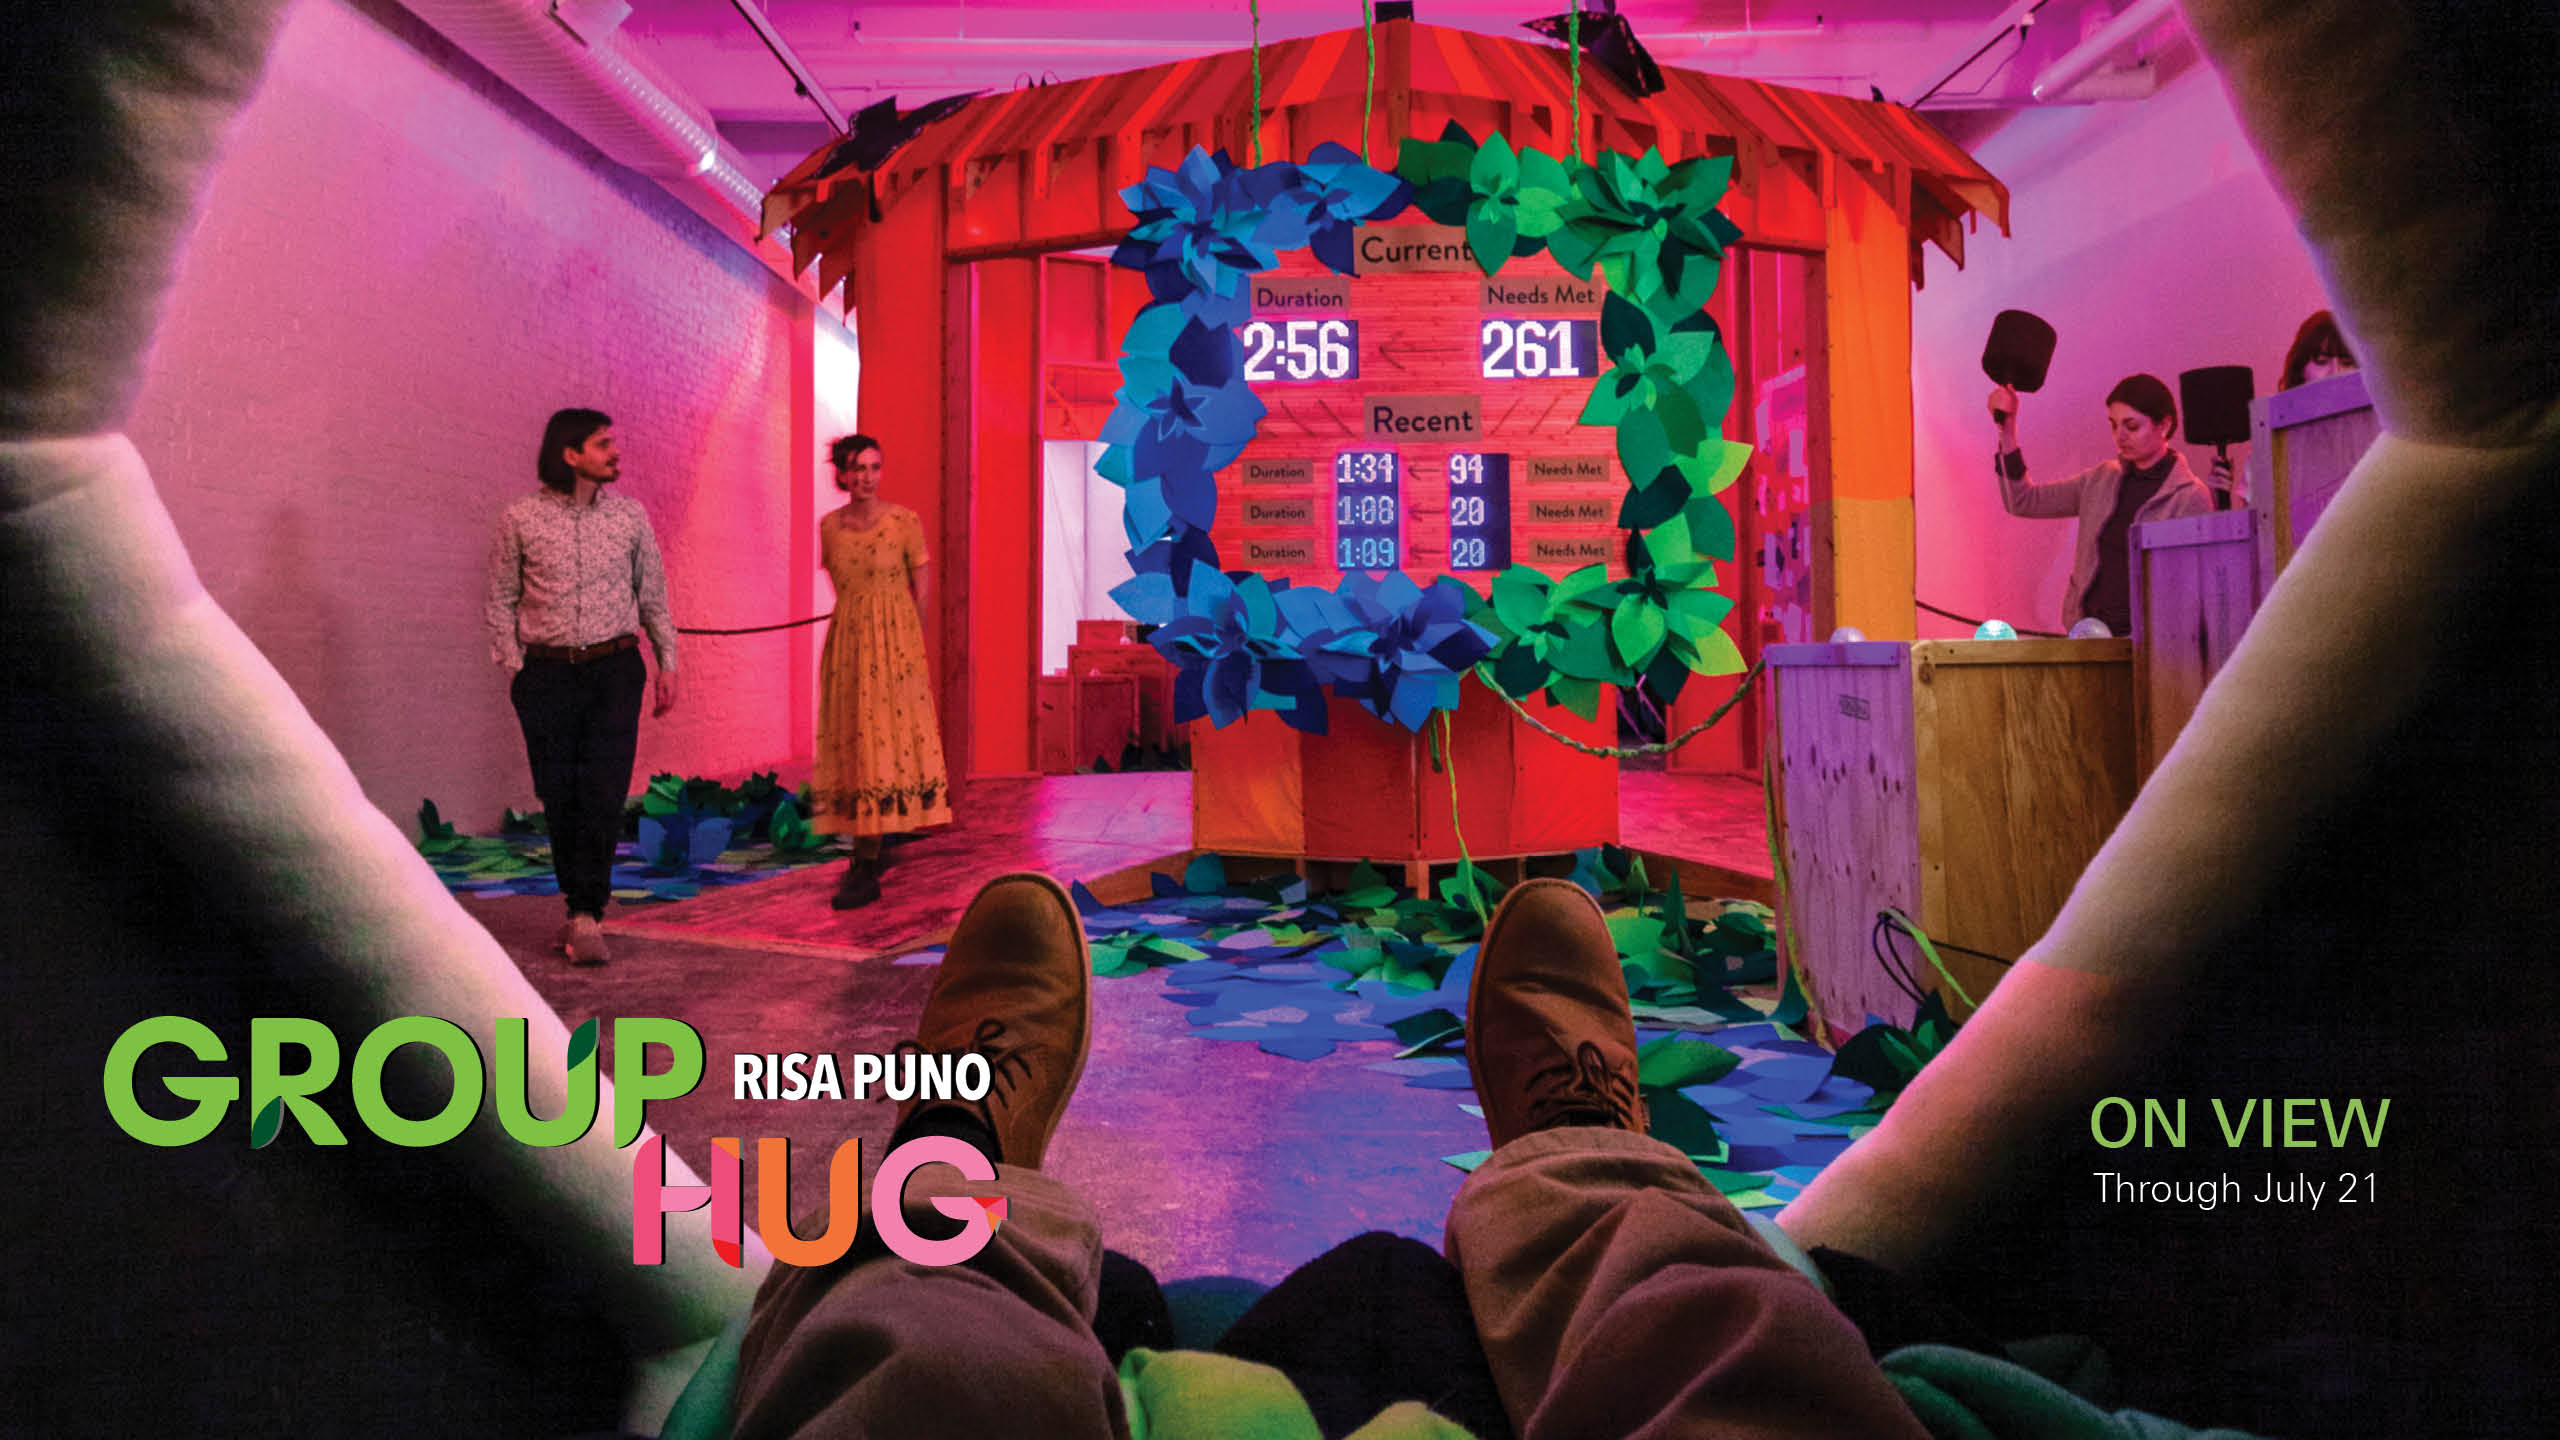 A view from inside a dark space, framed by a hexagonal shape and the photographer's own feet, into a room bathed in magenta-colored light. Straight ahead is a scoreboard with various times and scores. At the right, some people play a game with mallets. On the left, two people walk into the space. The text reads, 